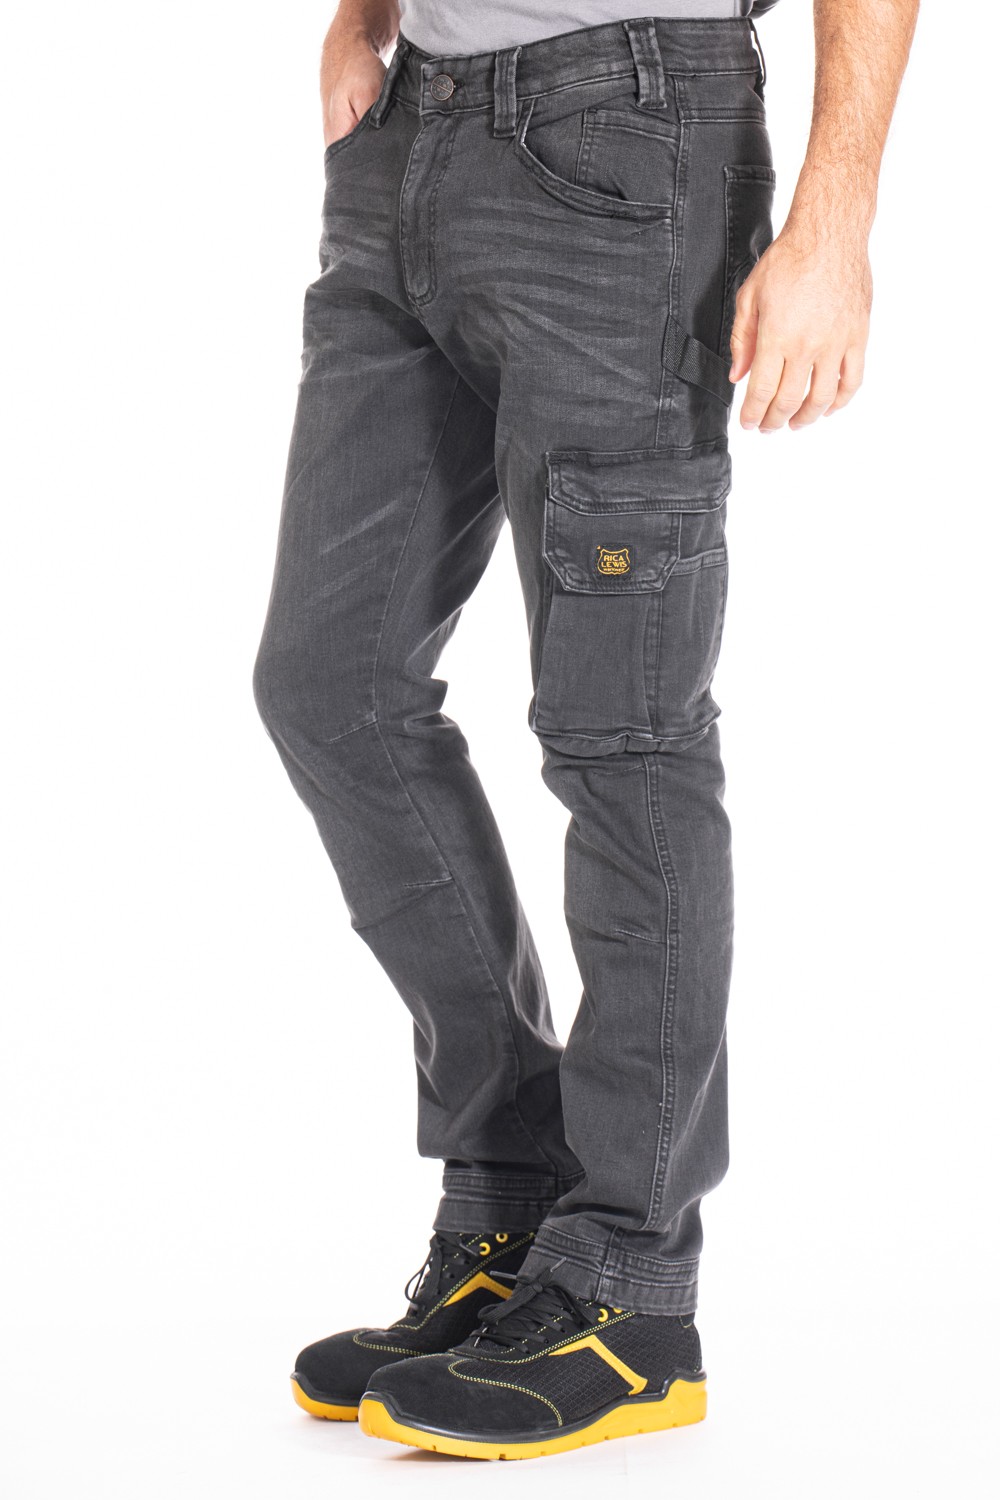 Jeans travail multipoches confort stretch Job Rica Lewis gris cotepro